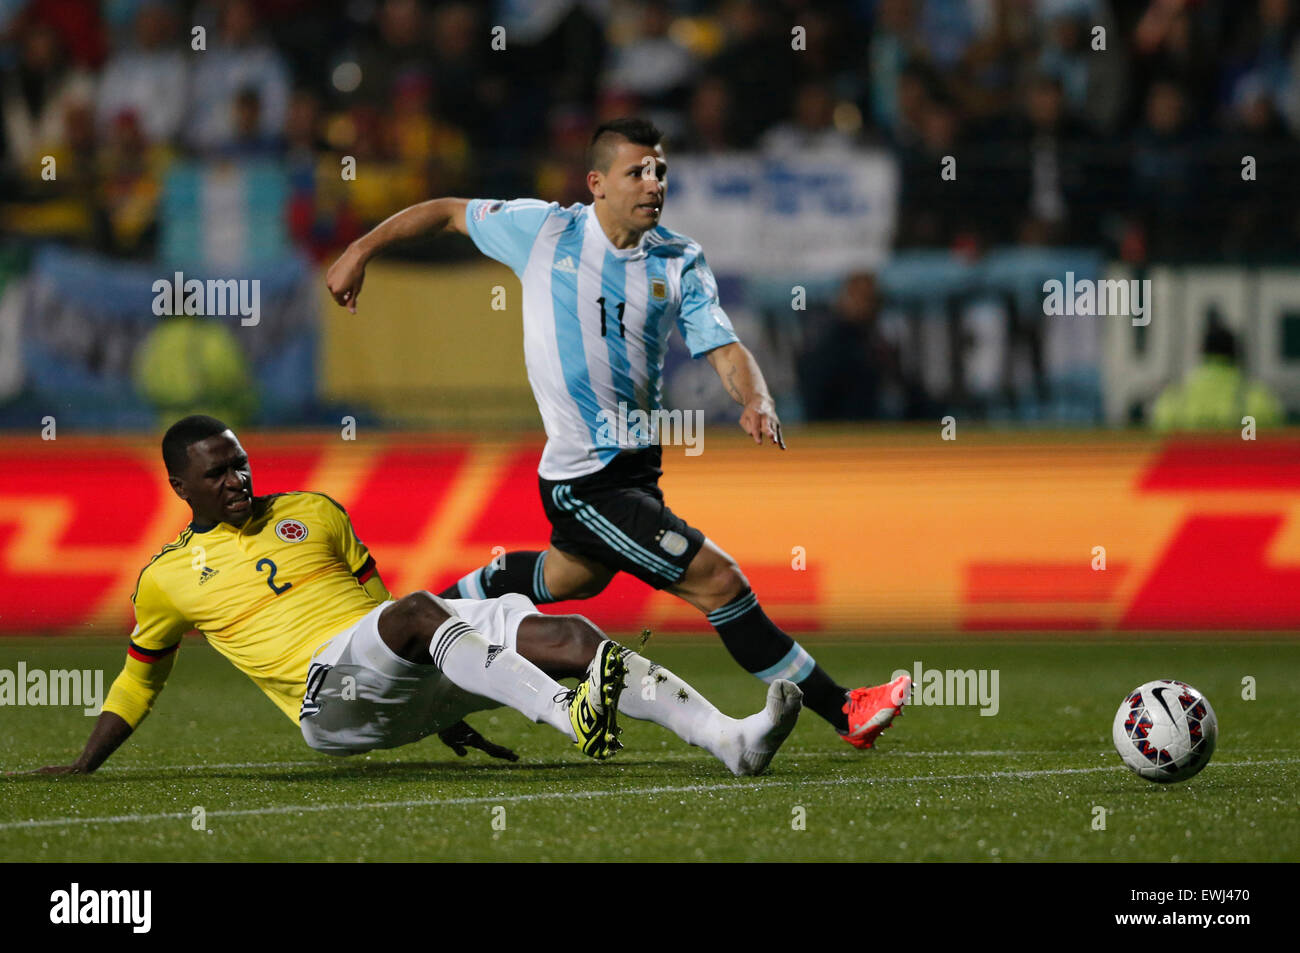 Vina Del Mar, Chile. 26th June, 2015. Argentina's Sergio Aguero (R) vies the ball with Colombia's Cristian Zapata during the quarter-final match between Argentina and Colombia at the Copa America Chile 2015 in the El Sausalito Stadium, in Vina del Mar city, Chile, on June 26, 2015. Credit:  Jorge Villegas/Xinhua/Alamy Live News Stock Photo